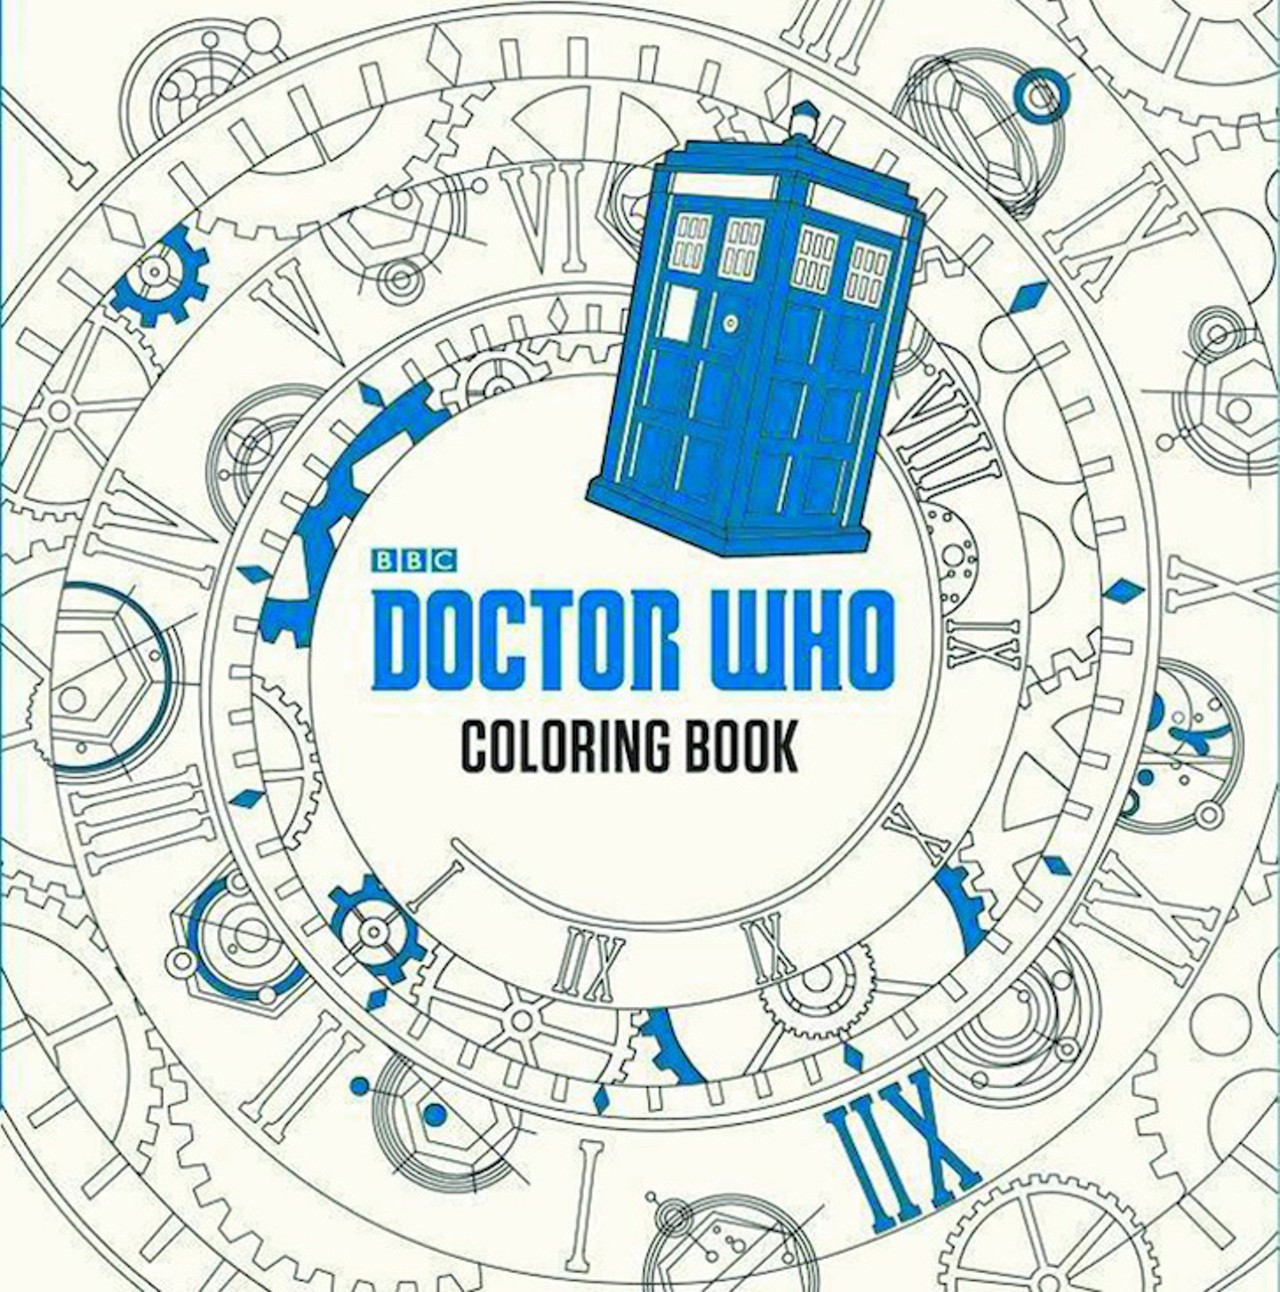 Dr. Who Coloring Book
For fans of timey-wimey fun. 
Buy it at amazon.com 